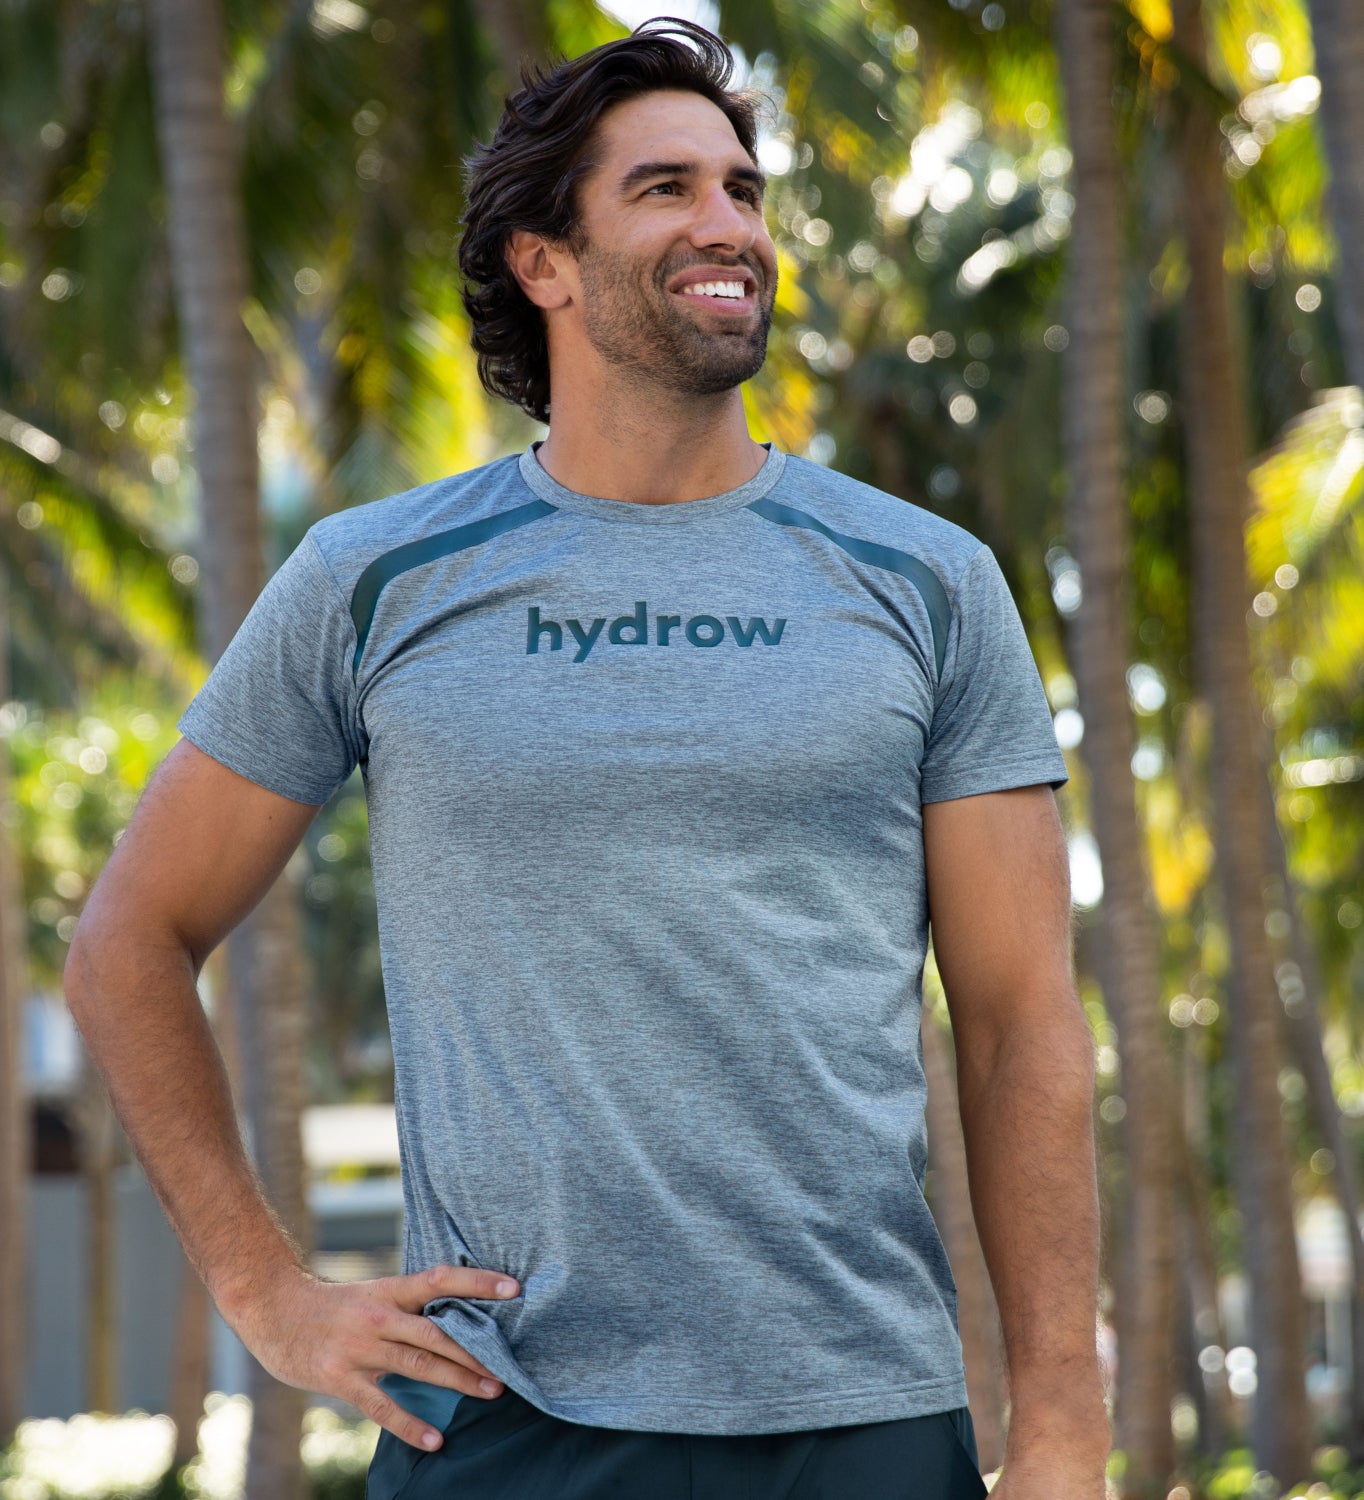 Grey Moisture wicking crew tee with hydrow logo on chest